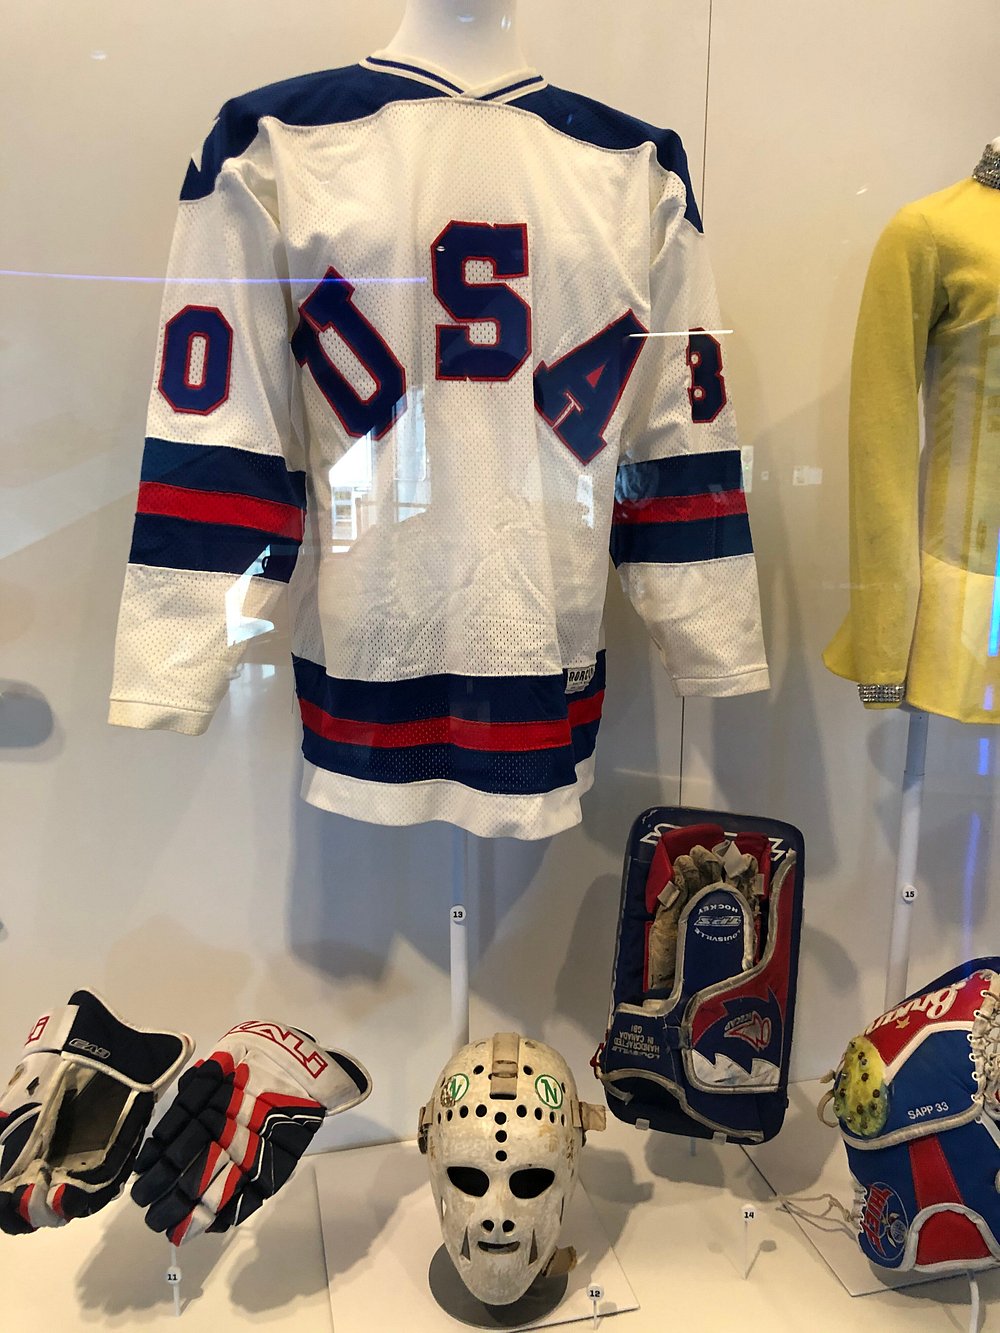 U.S. Olympic & Paralympic Museum